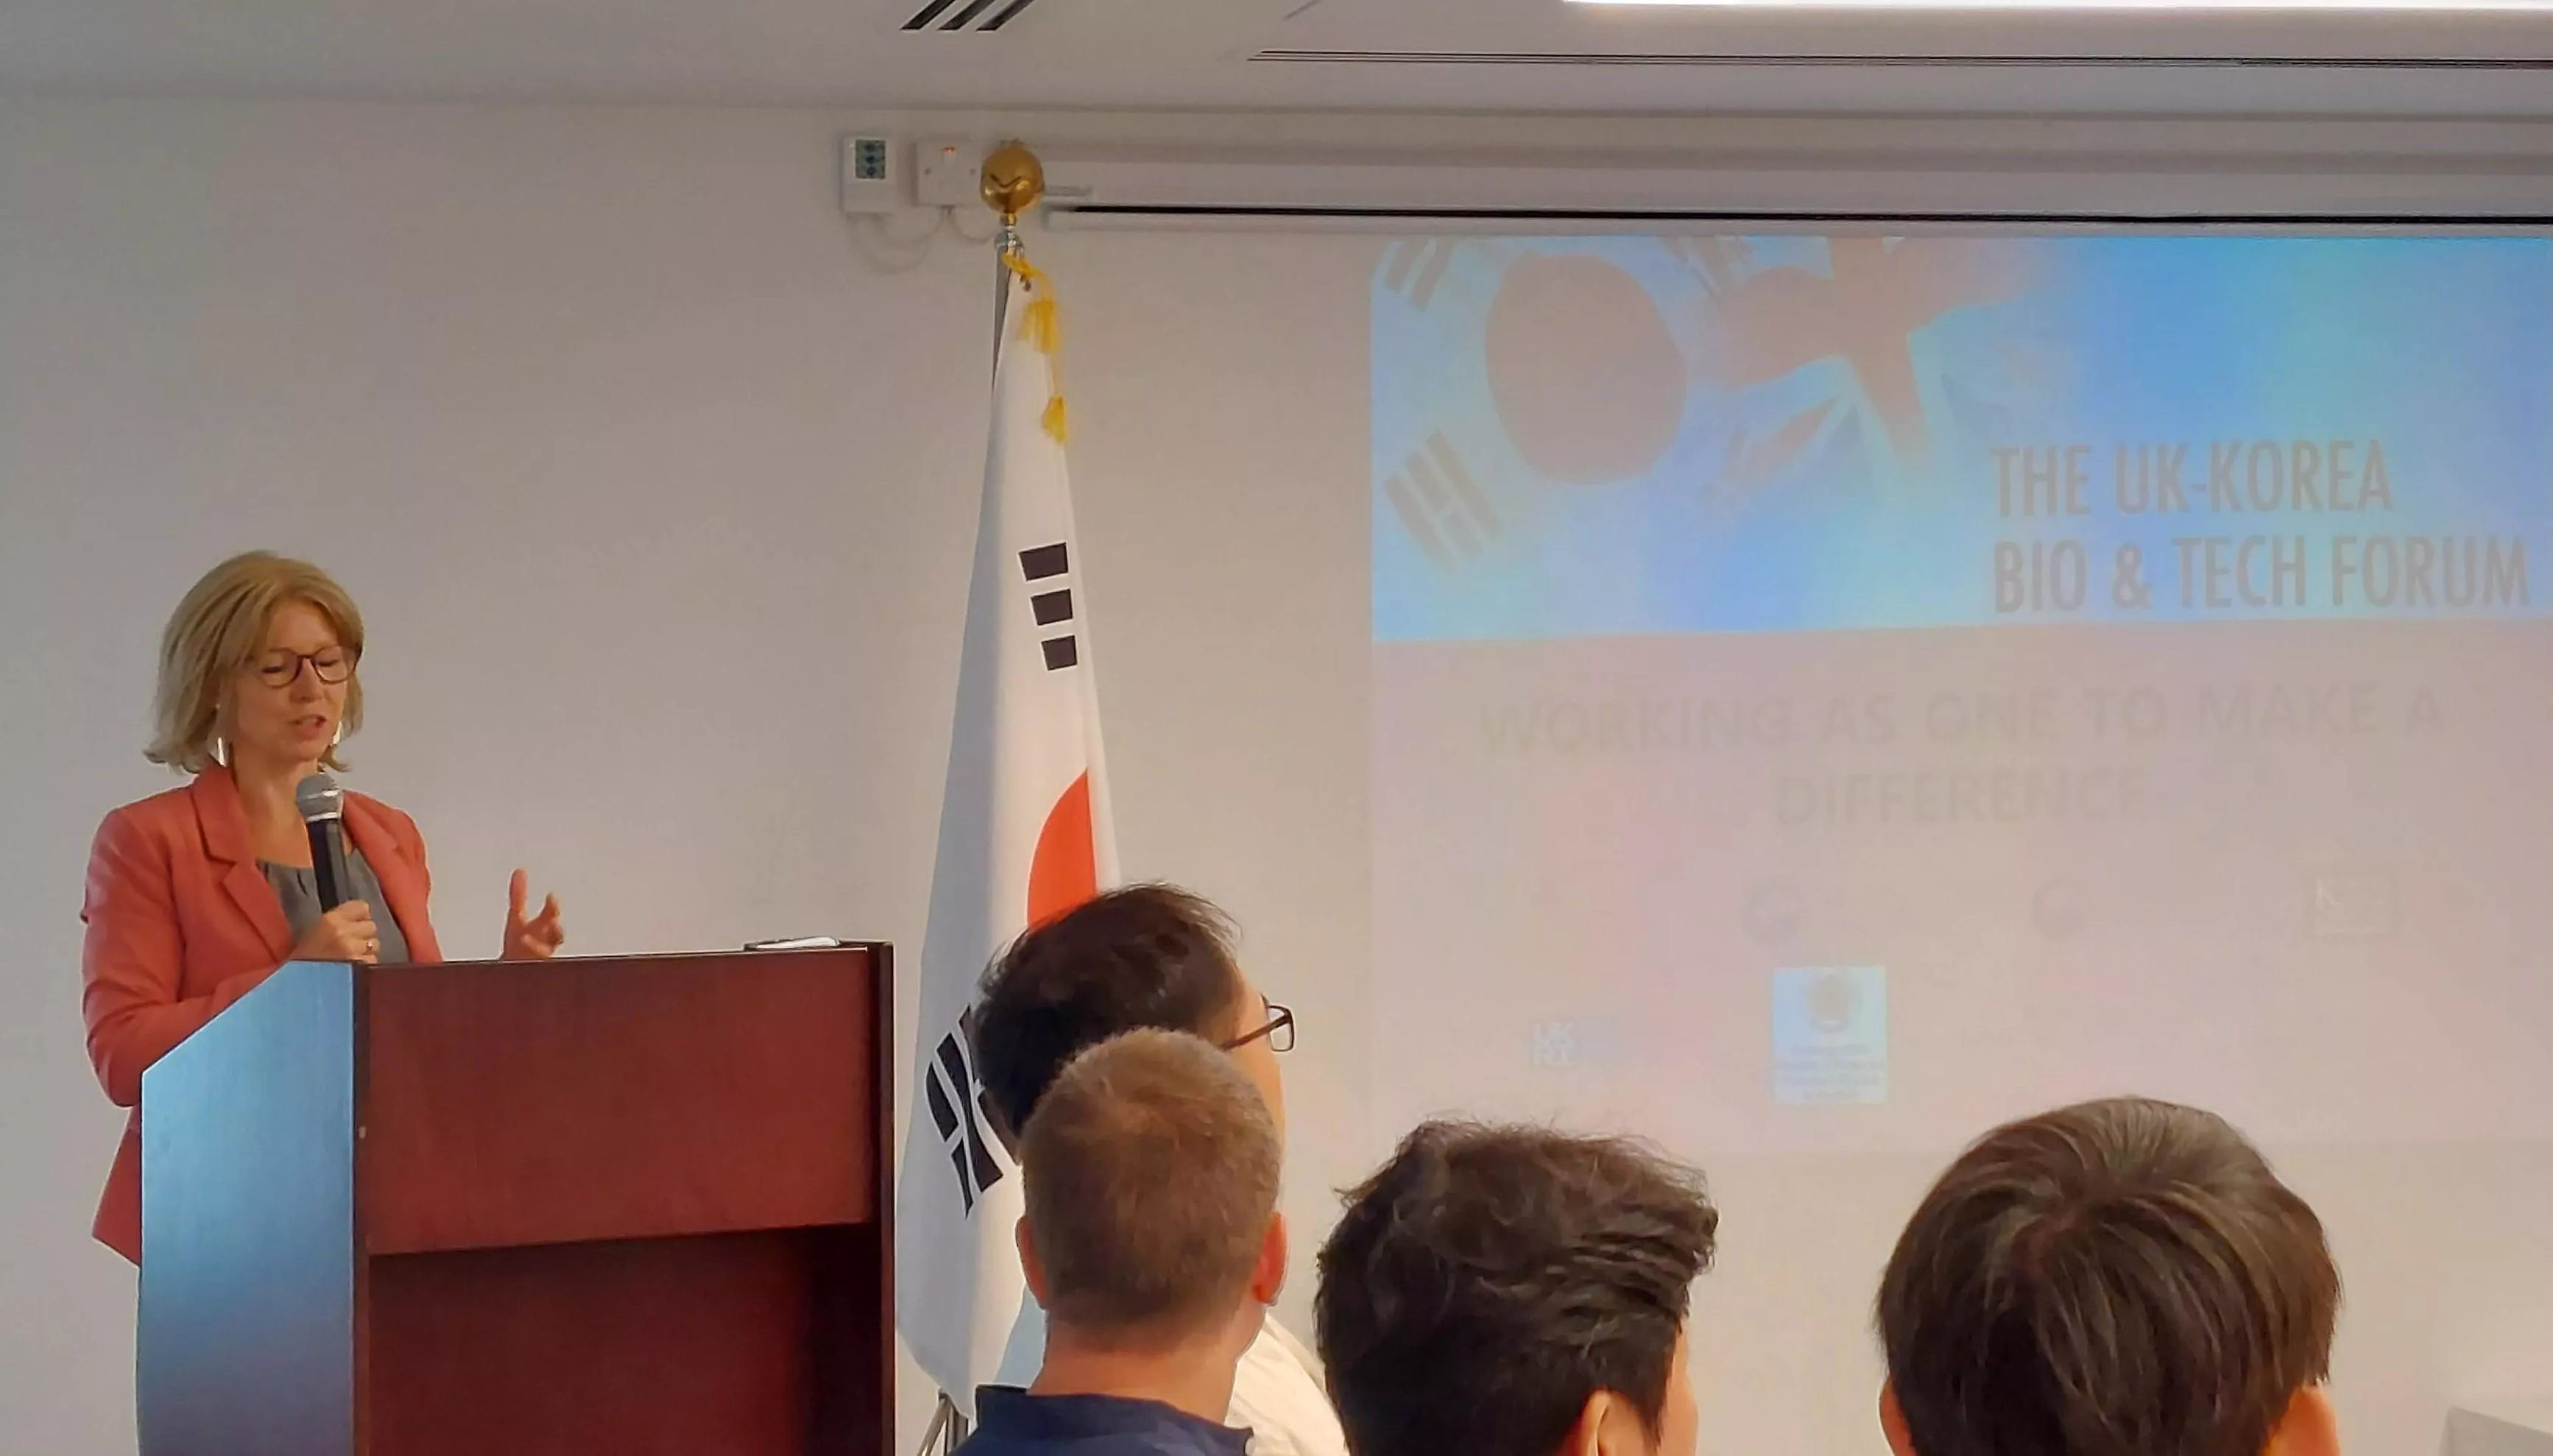 Ms Susie Kitchens stands behind a podium giving opening remarks to attendees of UK-Korea Bio&Tech Forum. She wears glasses, coral blazer, grey top and holding a microphone.